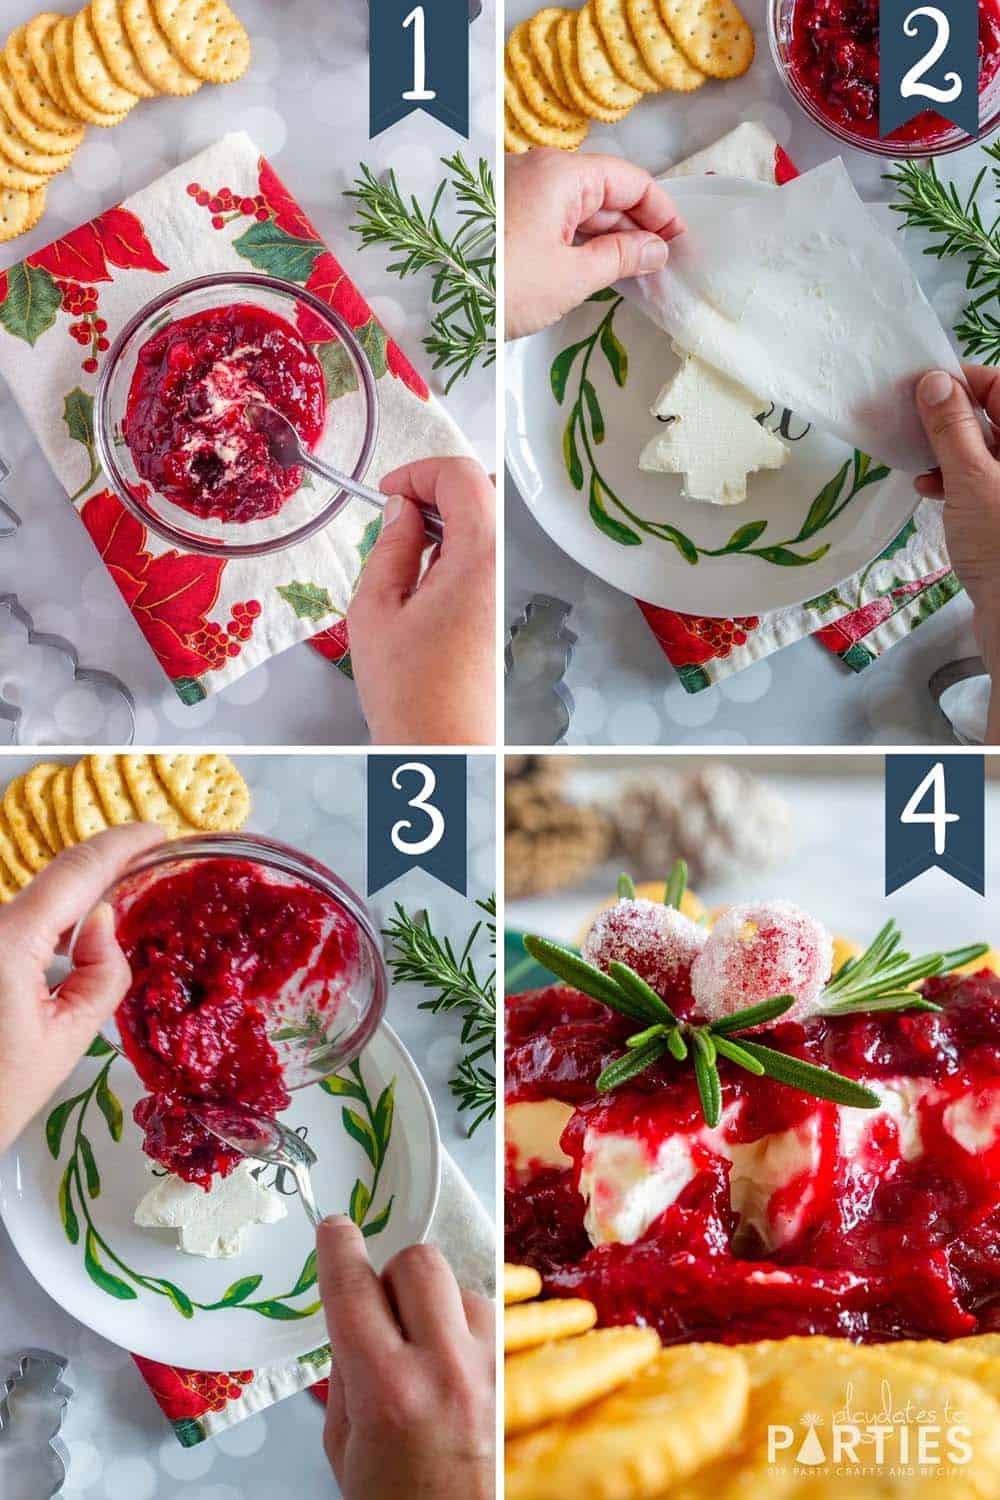 Steps 1 to 4 showing how to assemble cranberry cream cheese dip.